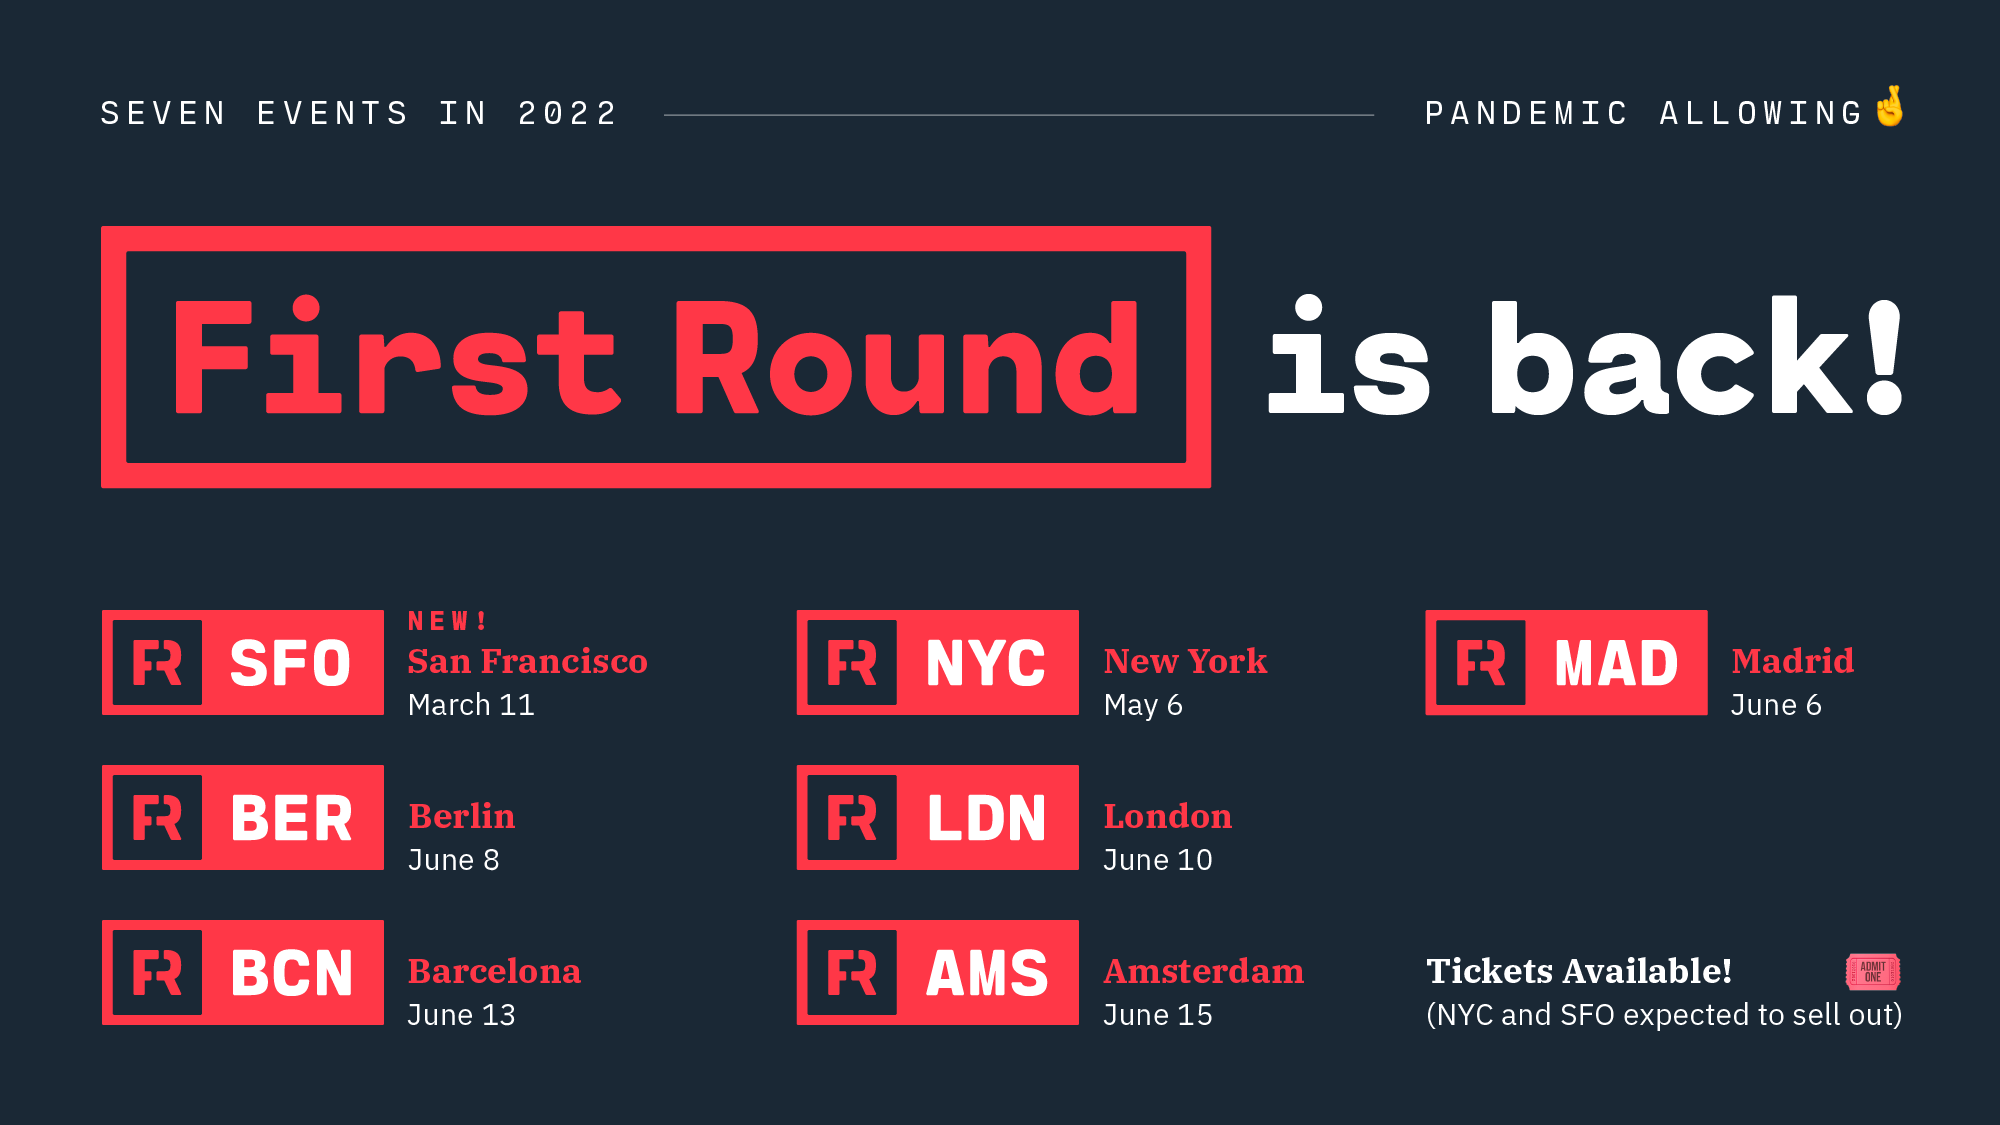 First Round is Back!